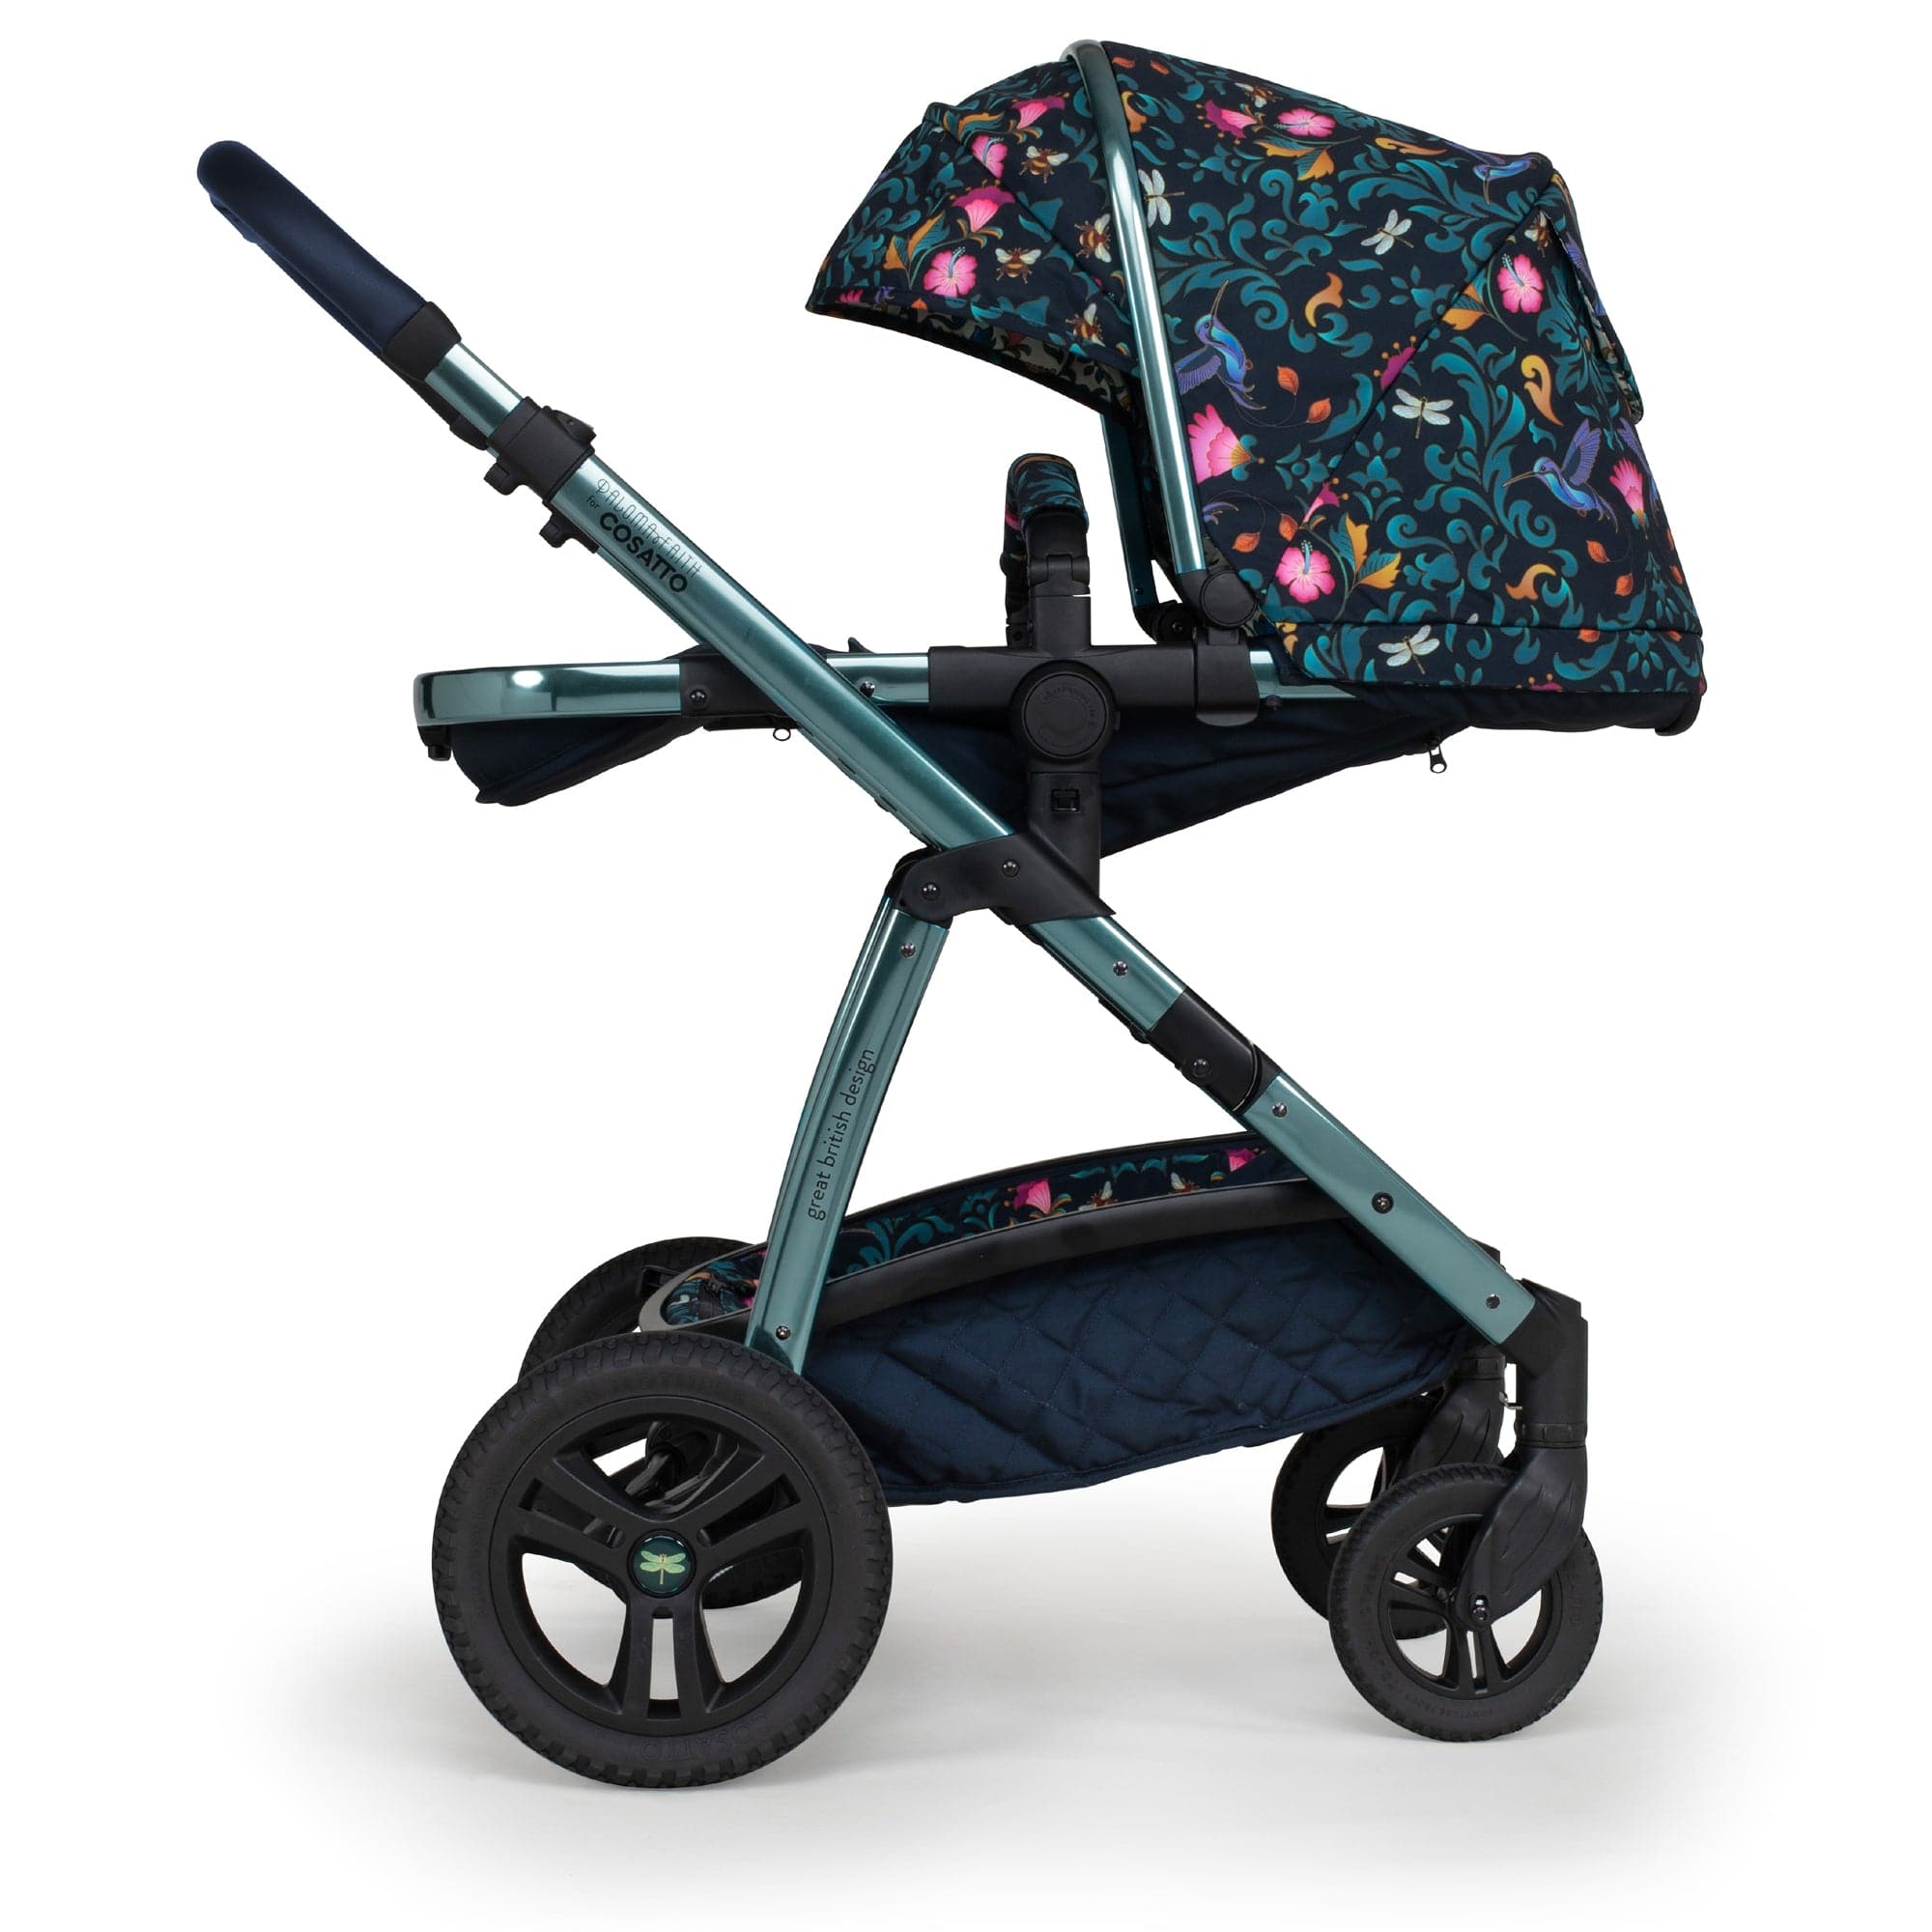 Cosatto travel systems Cosatto Wow 2 Acorn Everything Travel System Wildling Special Edition CT5297